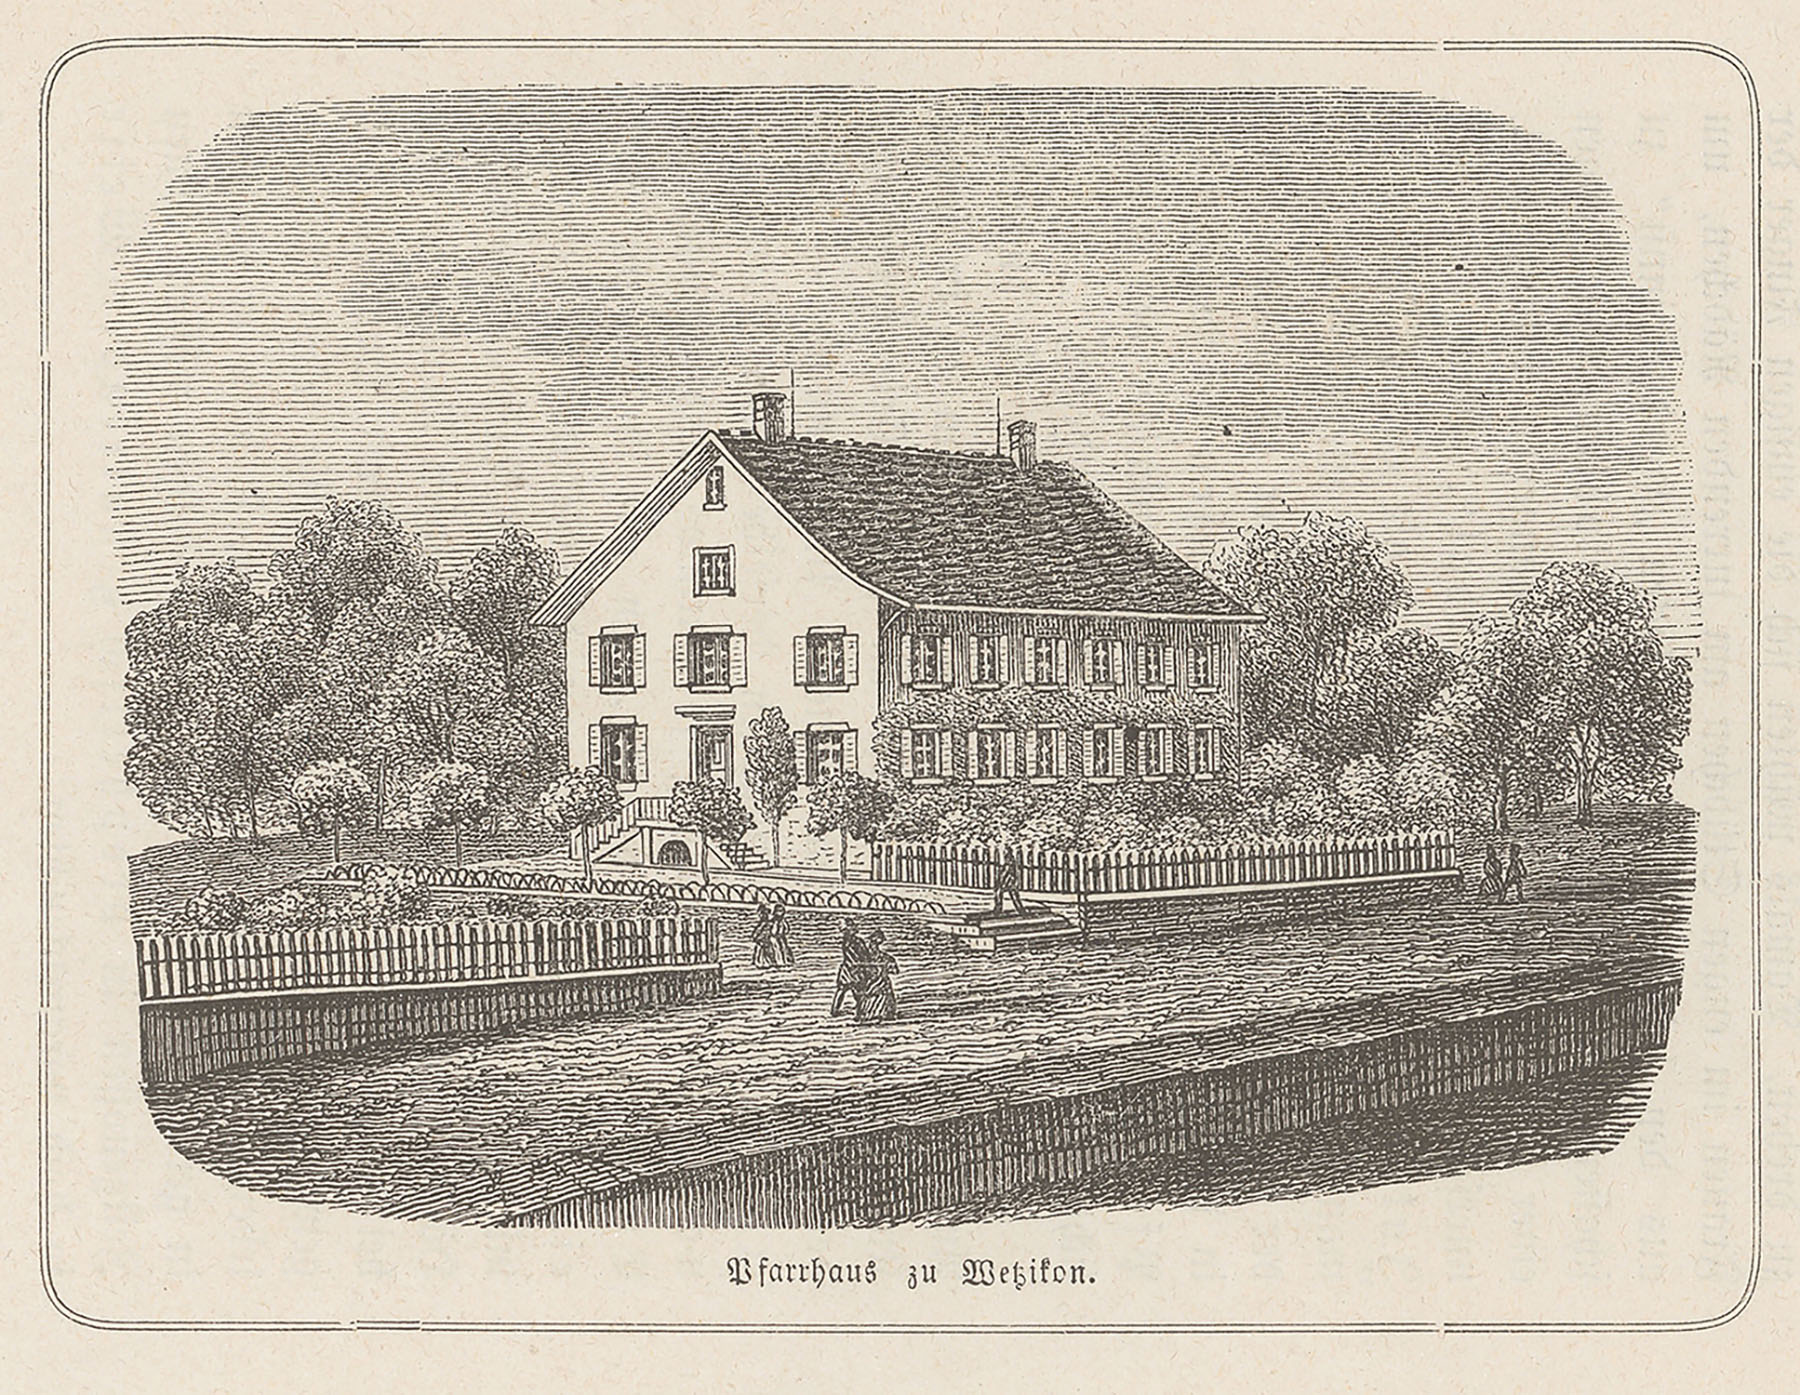 The vicarage in Wetzikon, likely in the second half of the 19th century. (Image: ZB Zürich)